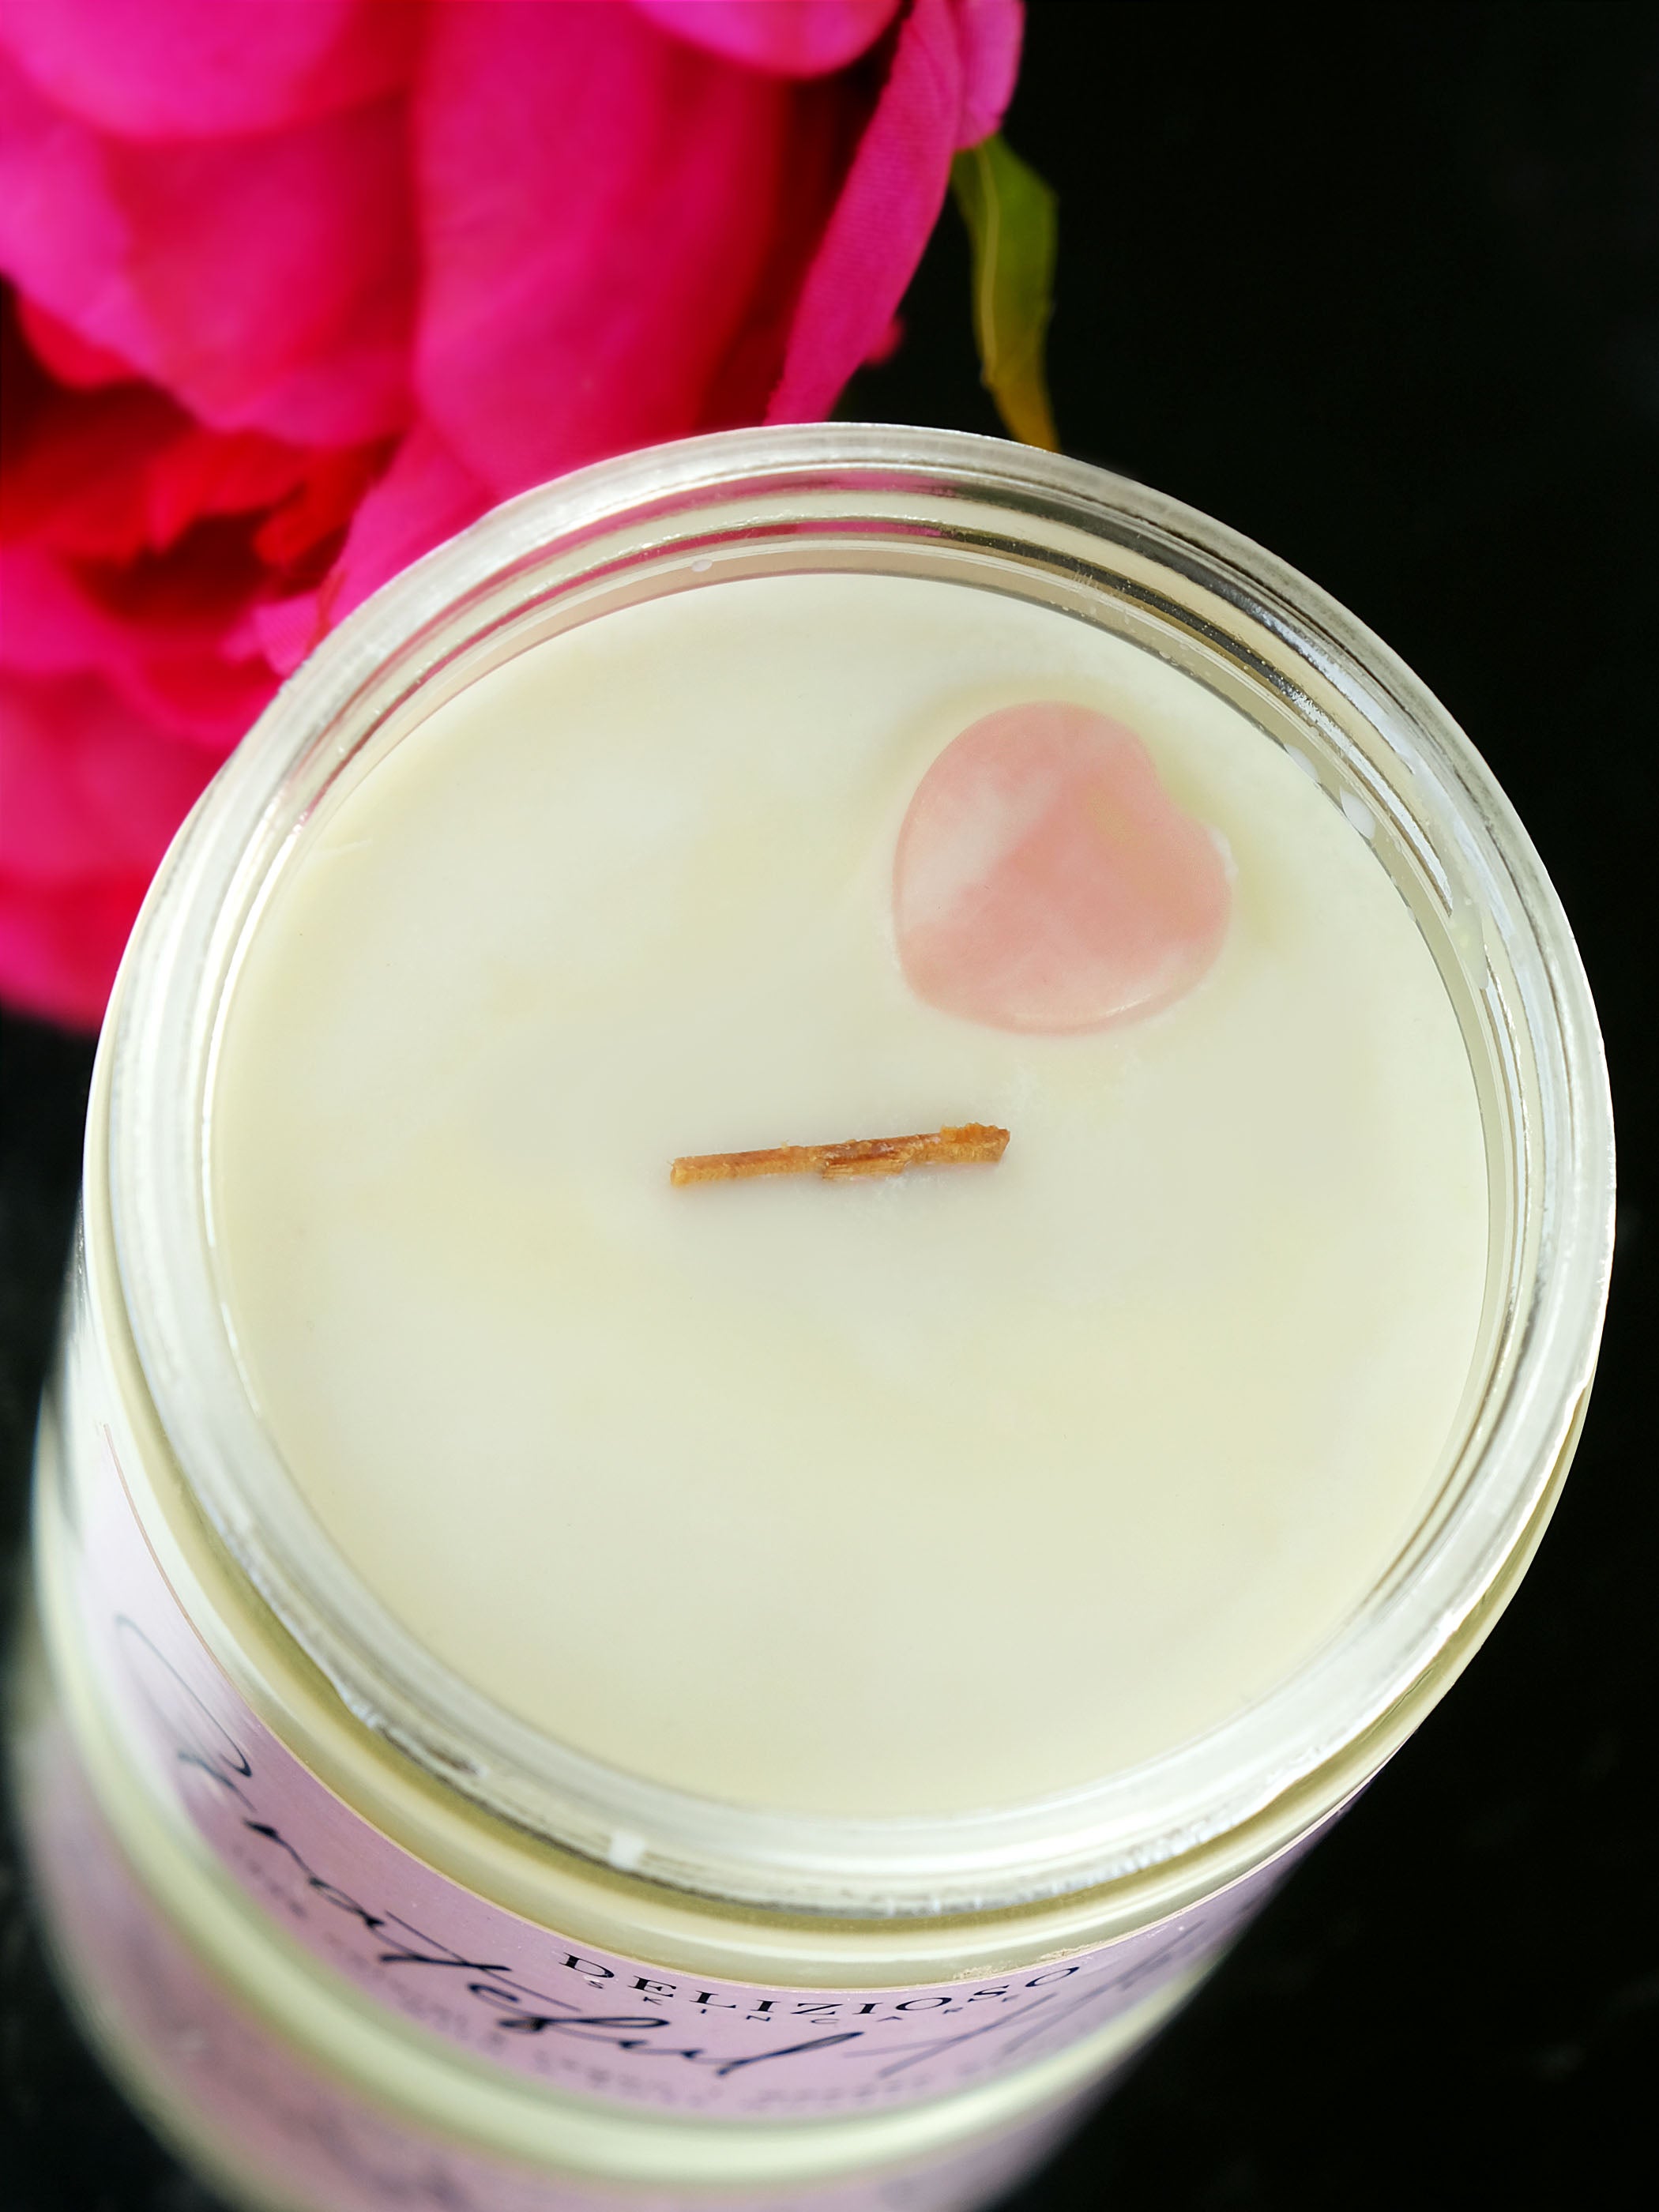 Grateful Heart Wooden Wick Soy Lotion Candle